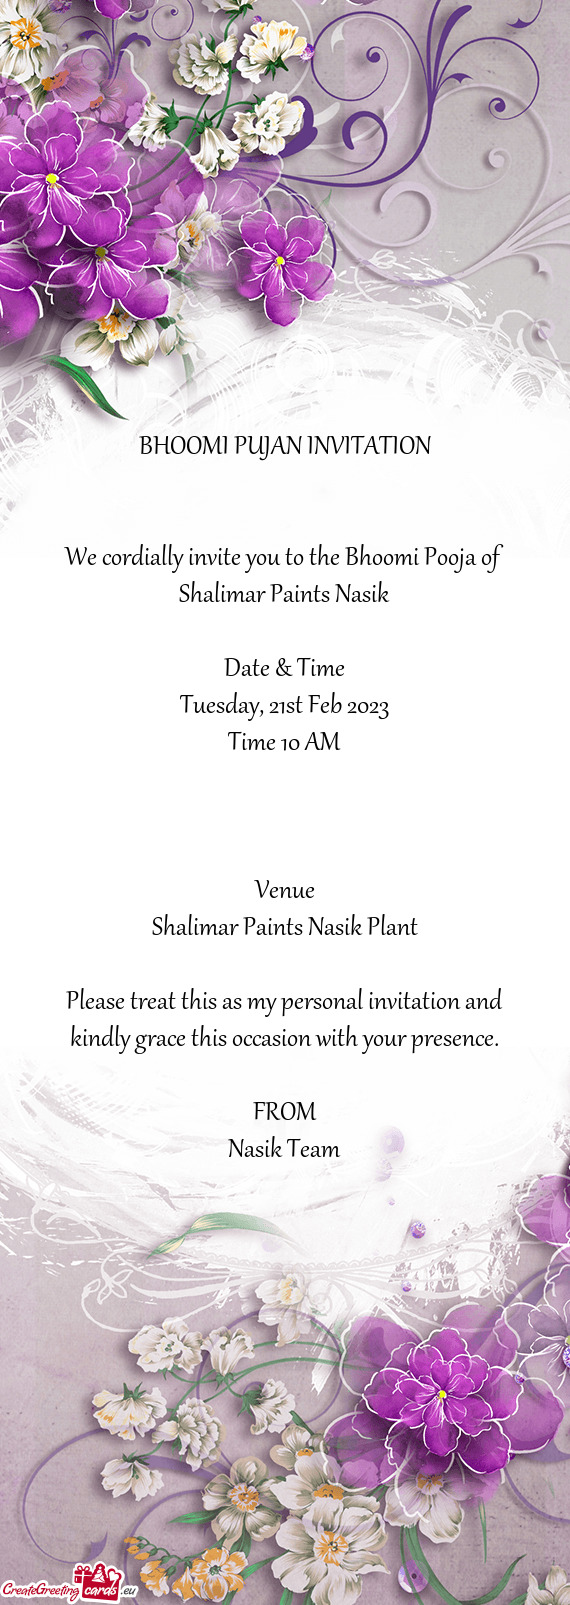 We cordially invite you to the Bhoomi Pooja of Shalimar Paints Nasik